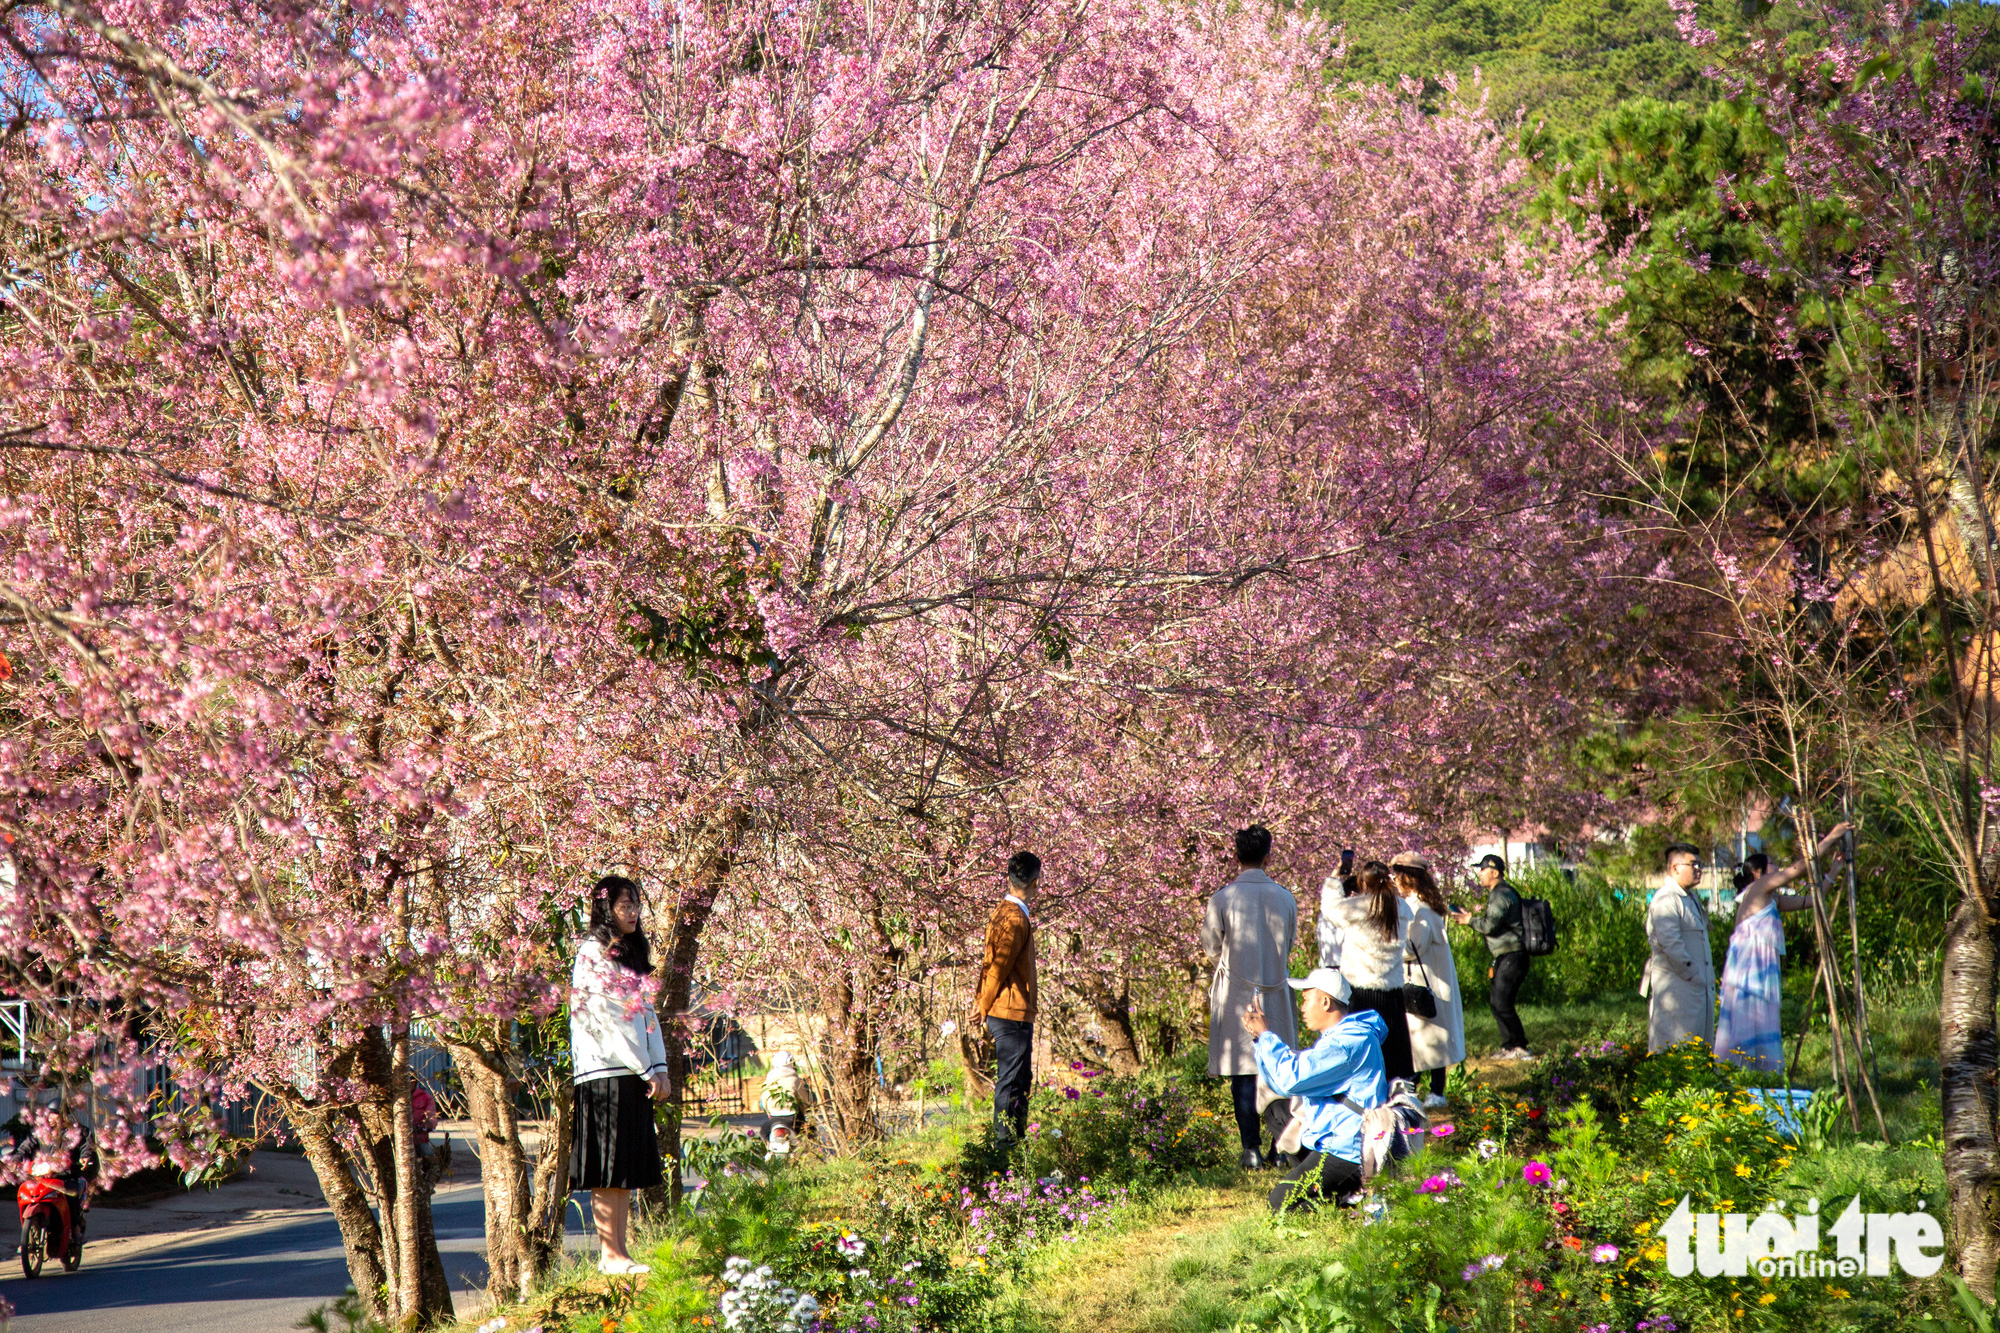 Visitors take photos with blooming apricot trees in Da Lat City, Lam Dong Province, Vietnam. Photo: Tuoi Tre